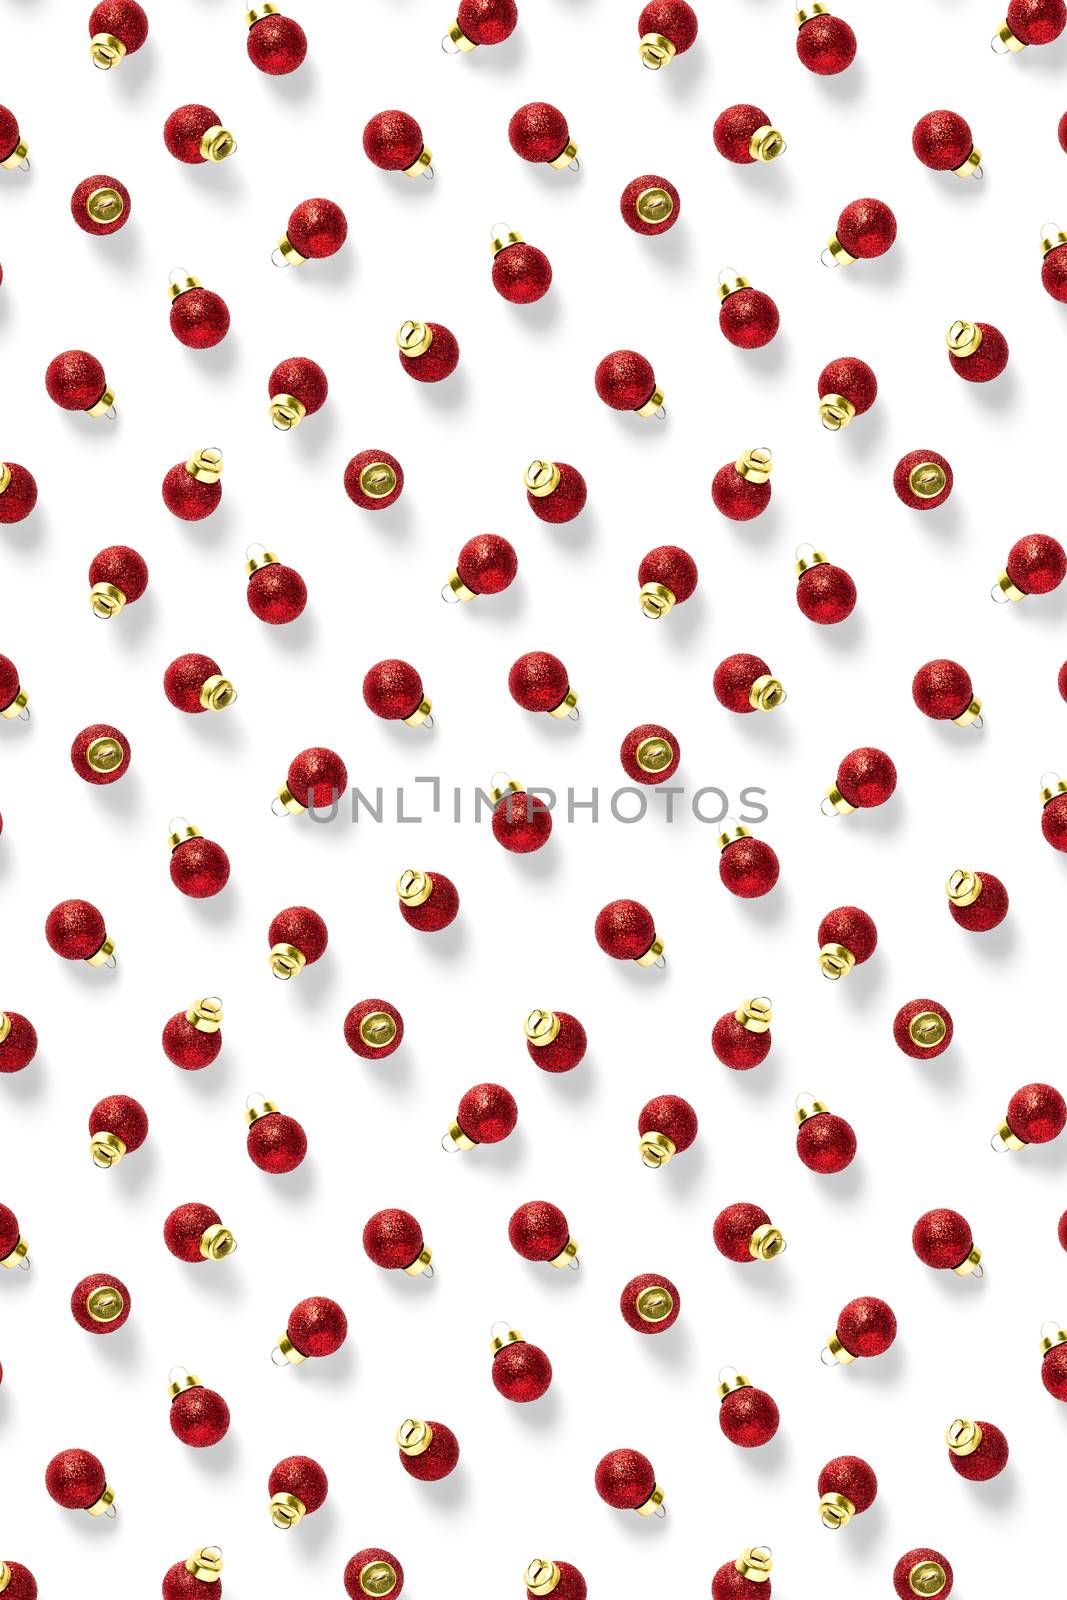 Christmas red decorations on white background. Christmas ornaments composition for background. Flat lay background madefrome red ornaments decorations